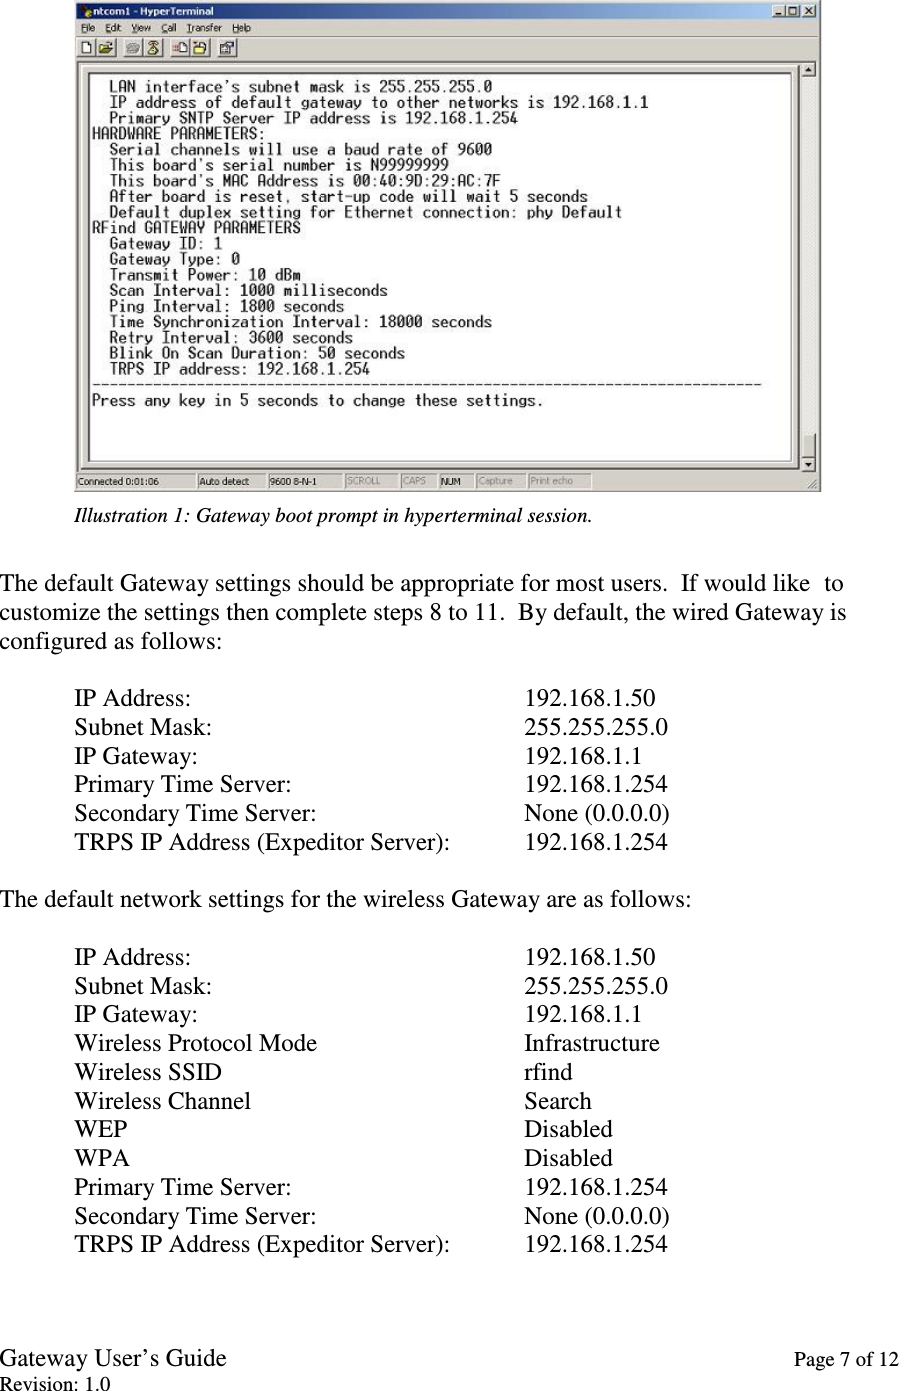 Gateway User’s Guide    Page 7 of 12 Revision: 1.0   Illustration 1: Gateway boot prompt in hyperterminal session.  The default Gateway settings should be appropriate for most users.  If would like  to customize the settings then complete steps 8 to 11.  By default, the wired Gateway is configured as follows:  IP Address:          192.168.1.50 Subnet Mask:          255.255.255.0 IP Gateway:          192.168.1.1 Primary Time Server:       192.168.1.254 Secondary Time Server:       None (0.0.0.0) TRPS IP Address (Expeditor Server):  192.168.1.254  The default network settings for the wireless Gateway are as follows:  IP Address:          192.168.1.50 Subnet Mask:          255.255.255.0 IP Gateway:          192.168.1.1 Wireless Protocol Mode      Infrastructure Wireless SSID         rfind Wireless Channel        Search WEP            Disabled WPA            Disabled Primary Time Server:       192.168.1.254 Secondary Time Server:       None (0.0.0.0) TRPS IP Address (Expeditor Server):  192.168.1.254  